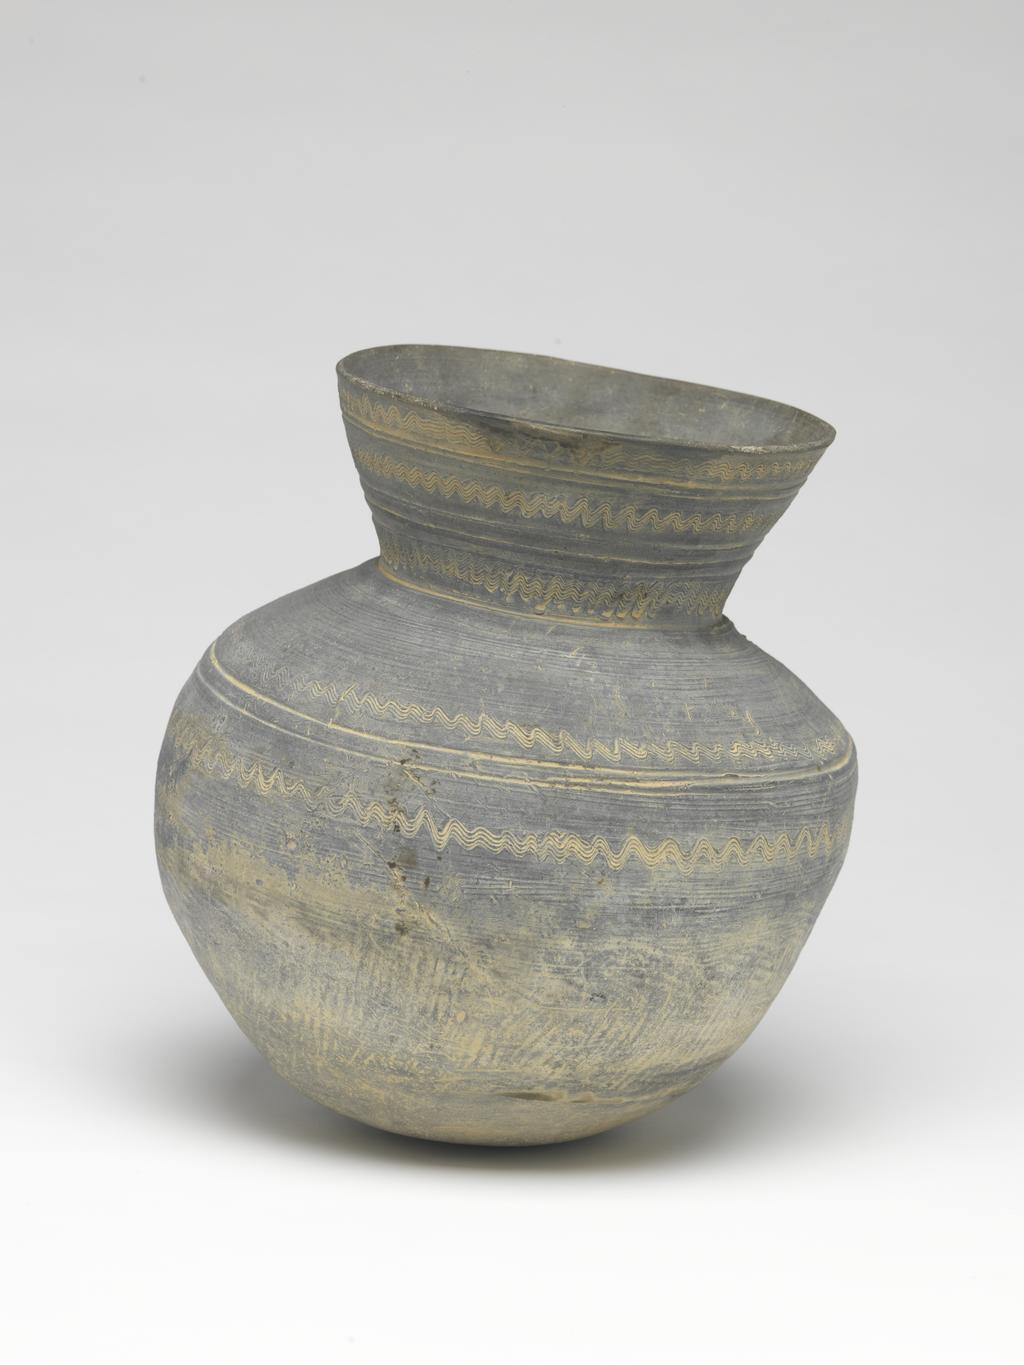 An image of Vase. Production Place: South West Korea. The globular body has a rounded base and straight sided flaring neck. The lower part of the body is decorated with faint impressed diagonal lines inclined in different directions. The upper part of the body and neck are smooth. The upper part of the body is decorated with a pair of incised horizontal lines between groups of close set wavy lines. On the neck there is a horizontal line, a group of close set wavy lines, three horizontal lines, and two horizontal lines between groups of close set wavy lines. There is a repair in the rim, and two dark shiny splodges over it. Hand built dark grey stoneware, incised decoration, height, 22, cm, 18 B.C. to AD 663. Paekche Kingdom. Korean. Acquisition Credit: Lent to the museum by Helen H. L. Whittow (nee Malcolm).